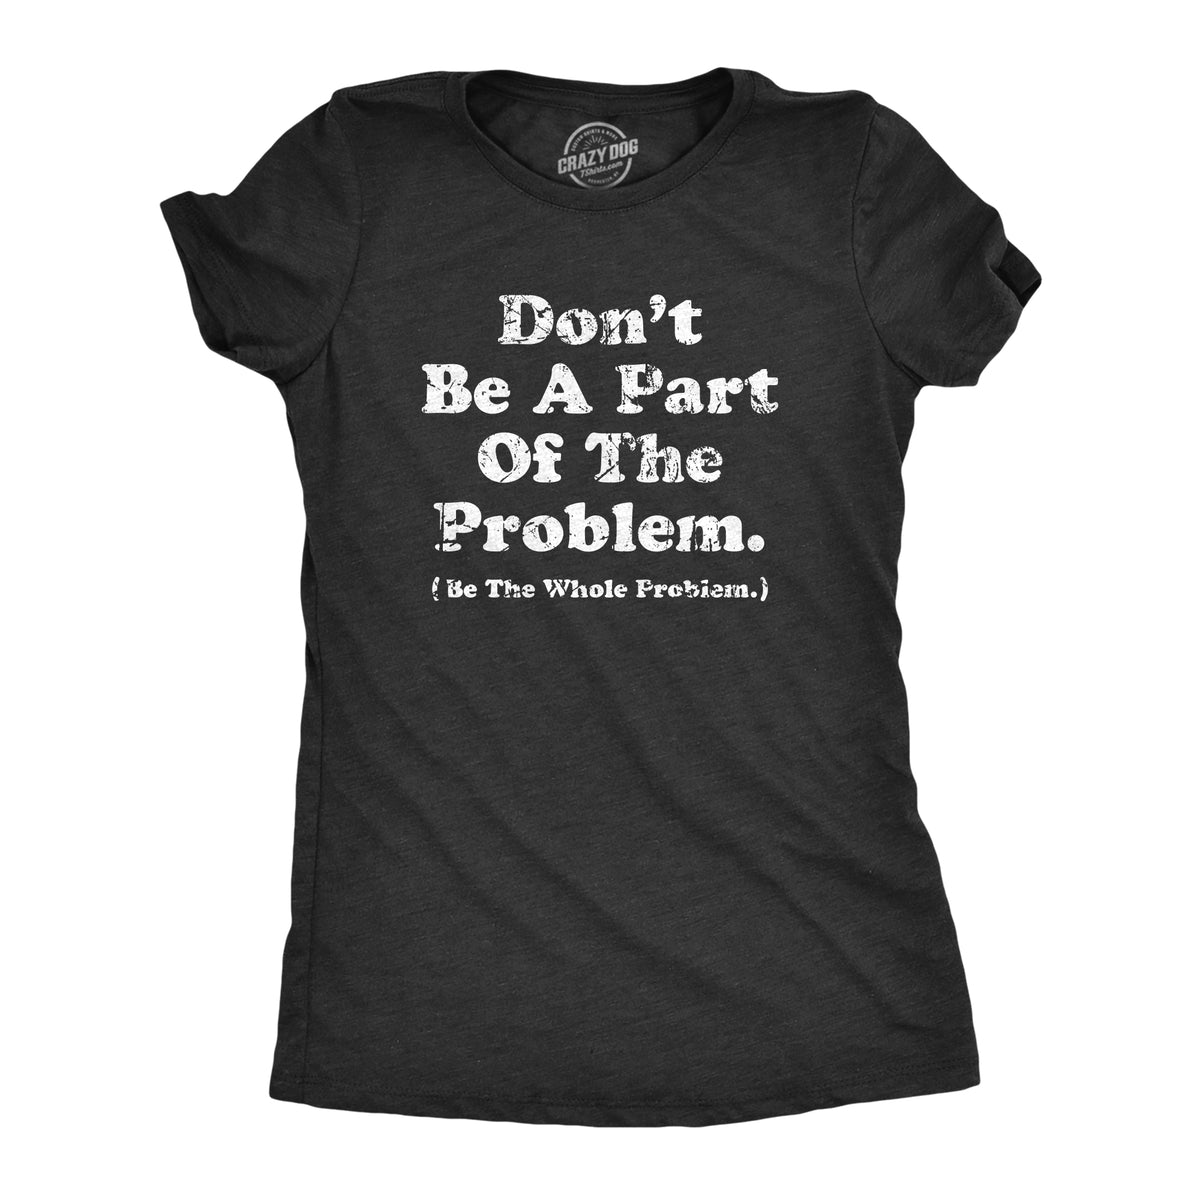 Funny Heather Black - PROBLEM Dont Be A Part Of The Problem Be The Whole Problem Womens T Shirt Nerdy Sarcastic Tee